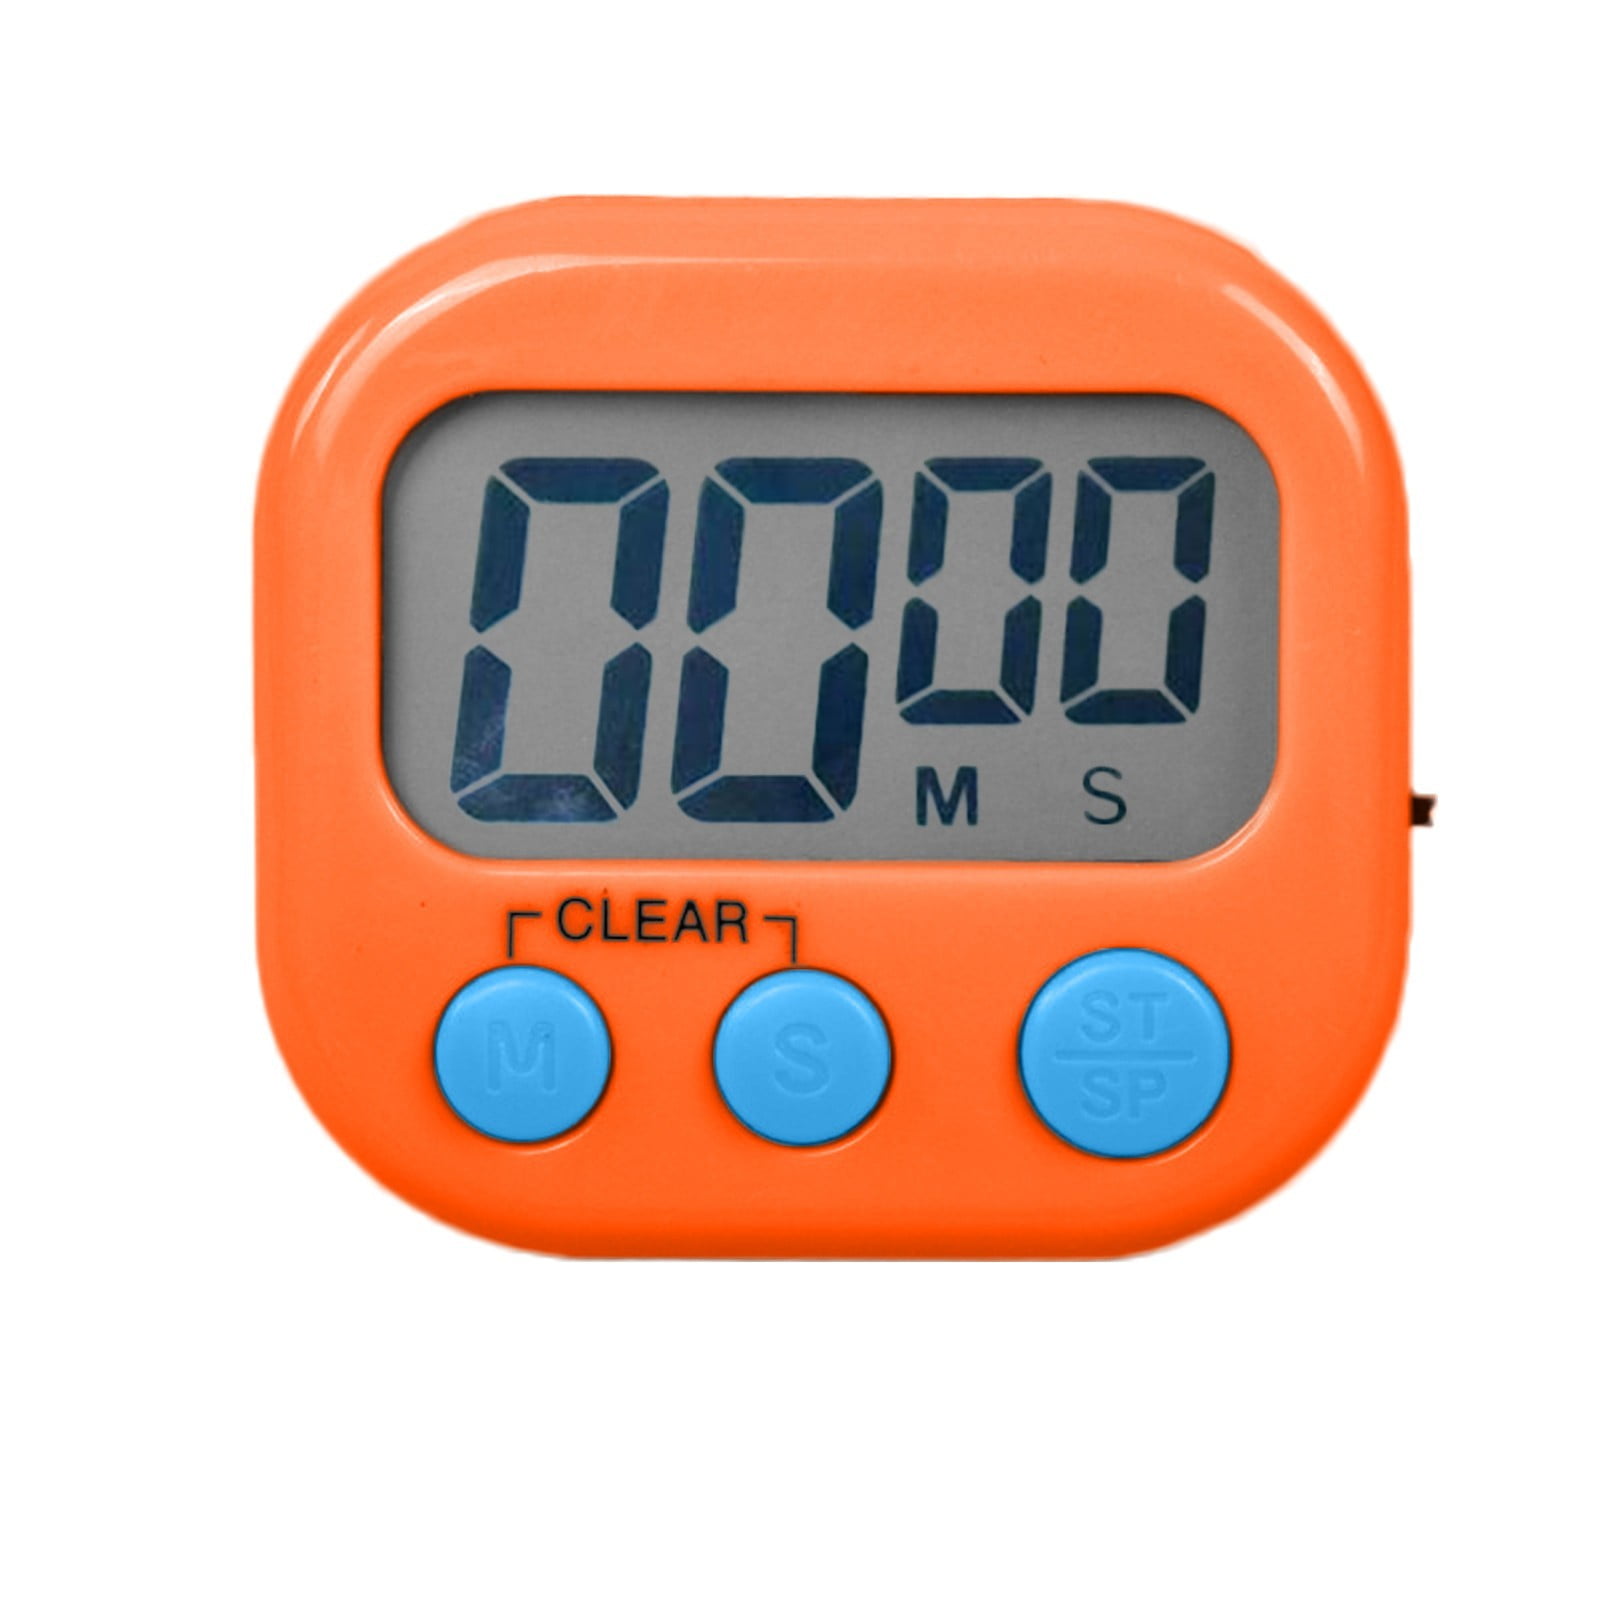 Peartso Digital Kitchen Timer, Classroom Timers for Teachers Kids, Count Up  Countdown 